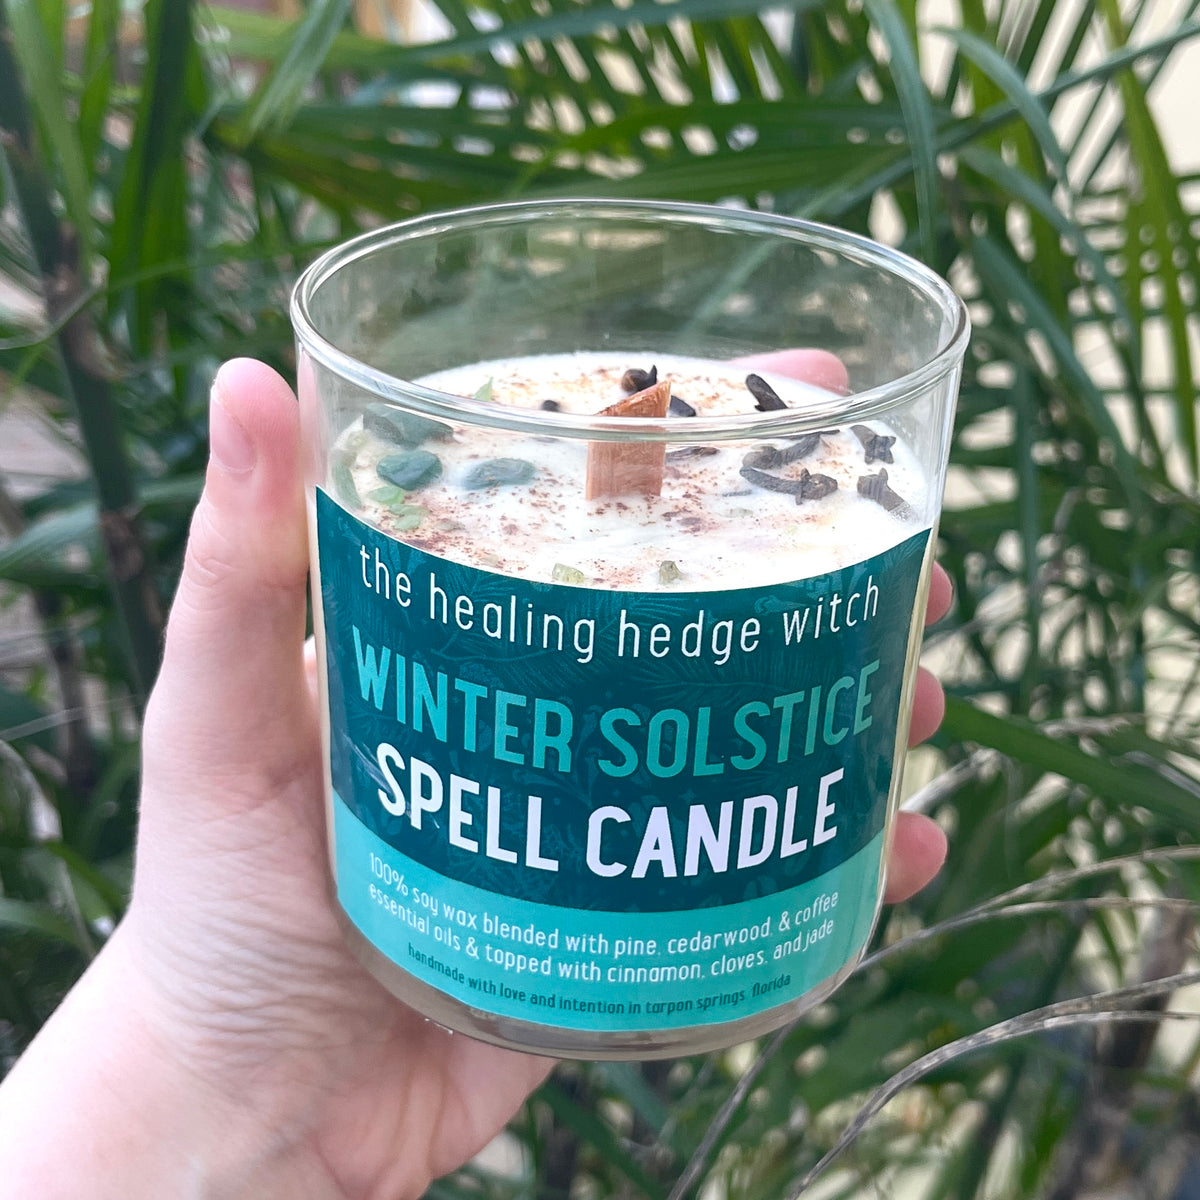 Winter Solstice Spell Candle